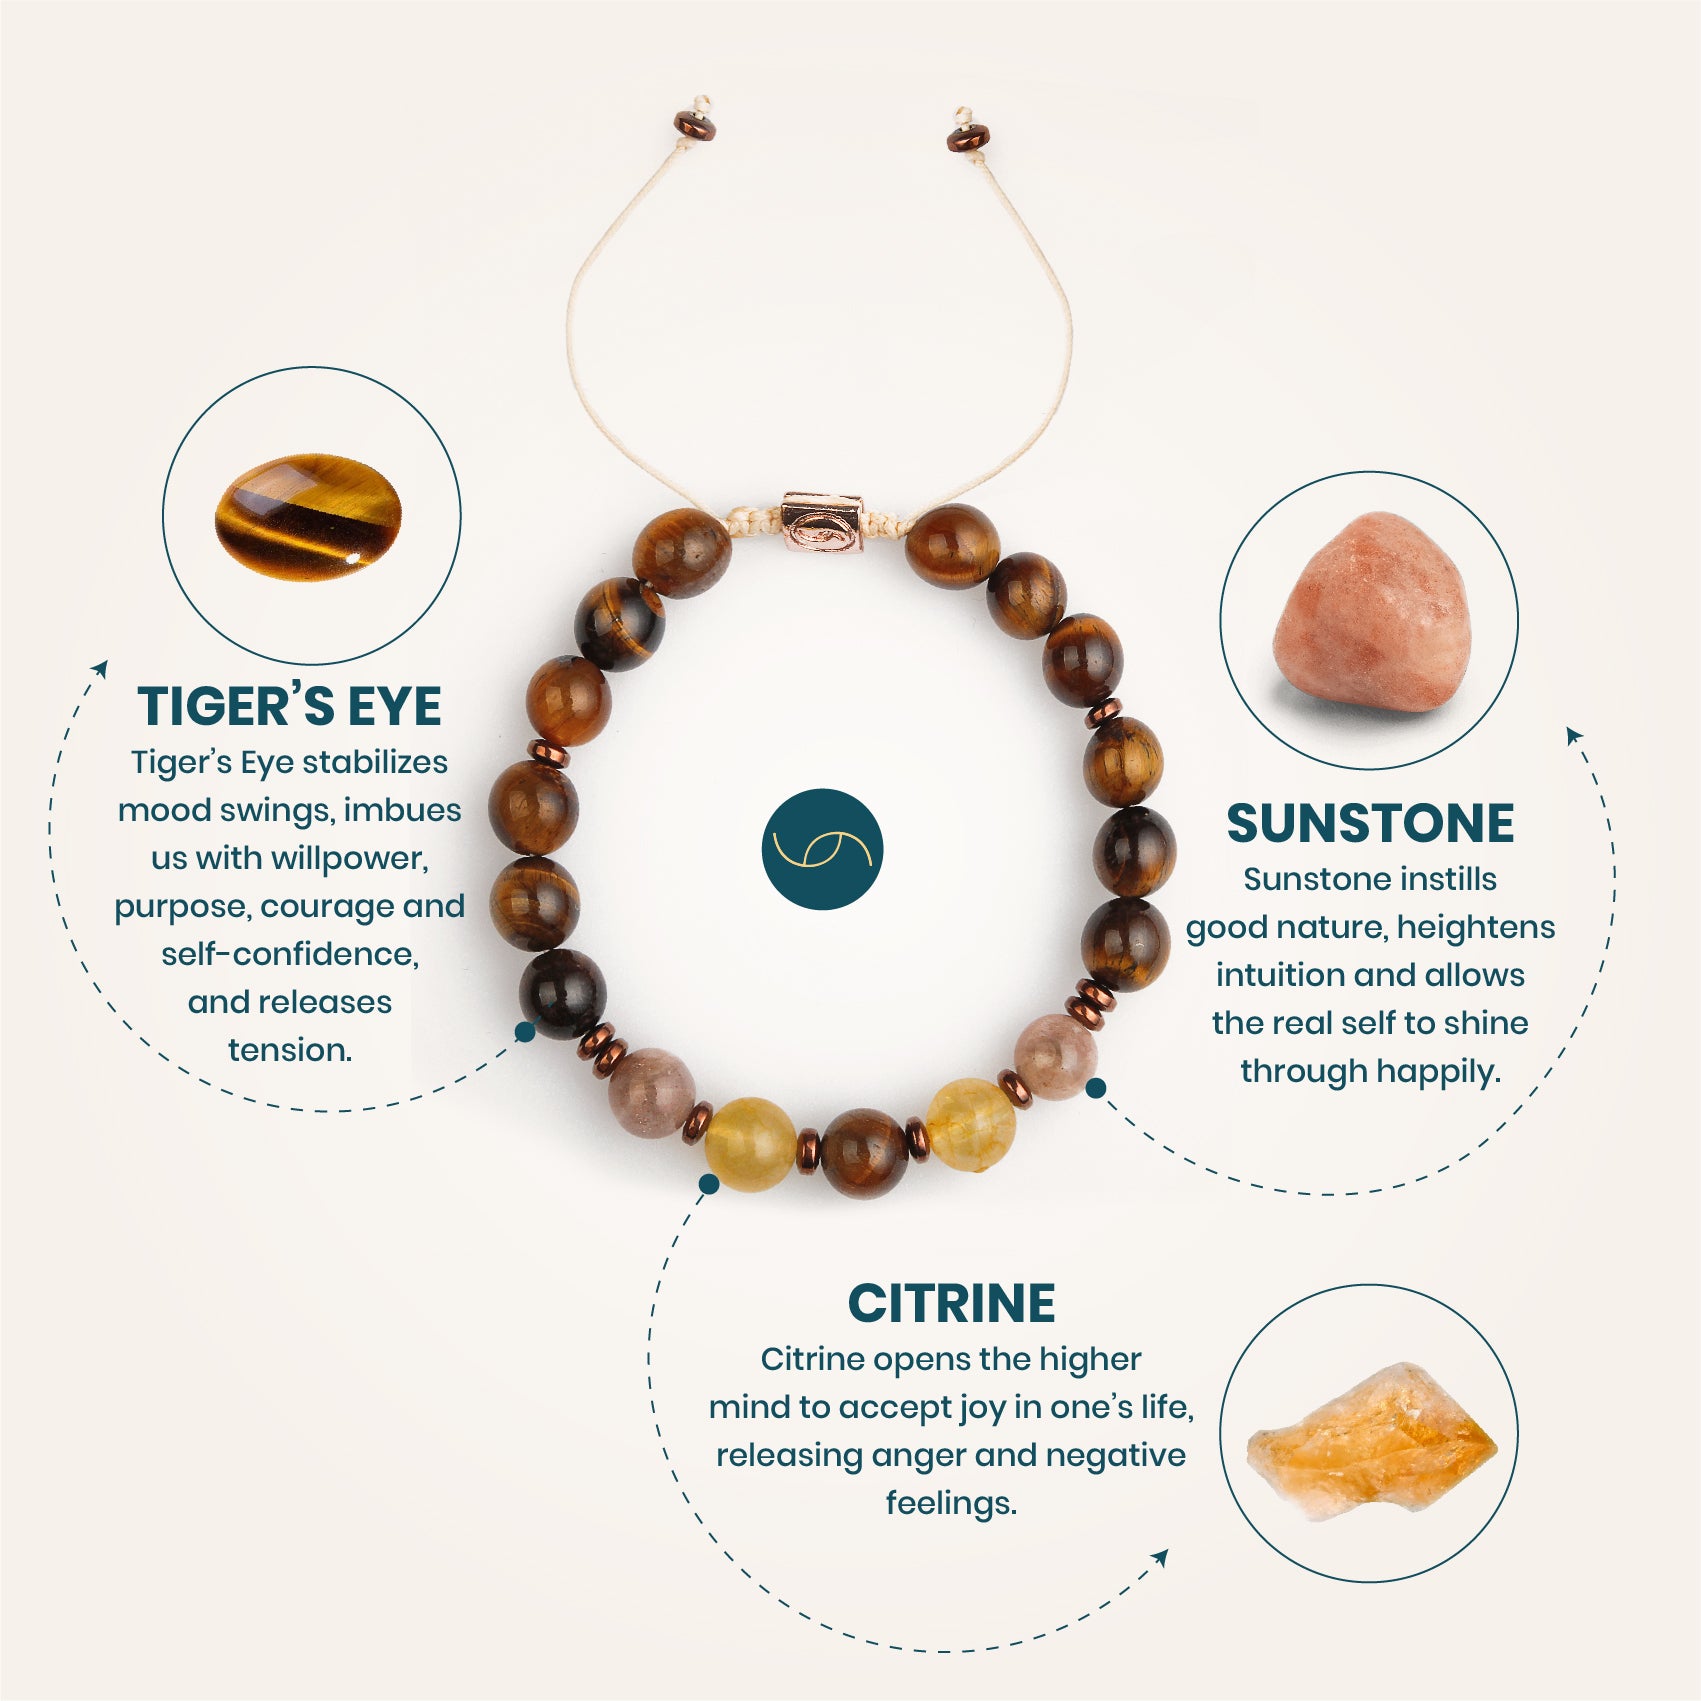 Benefits of tigers eye sunstone and citrine